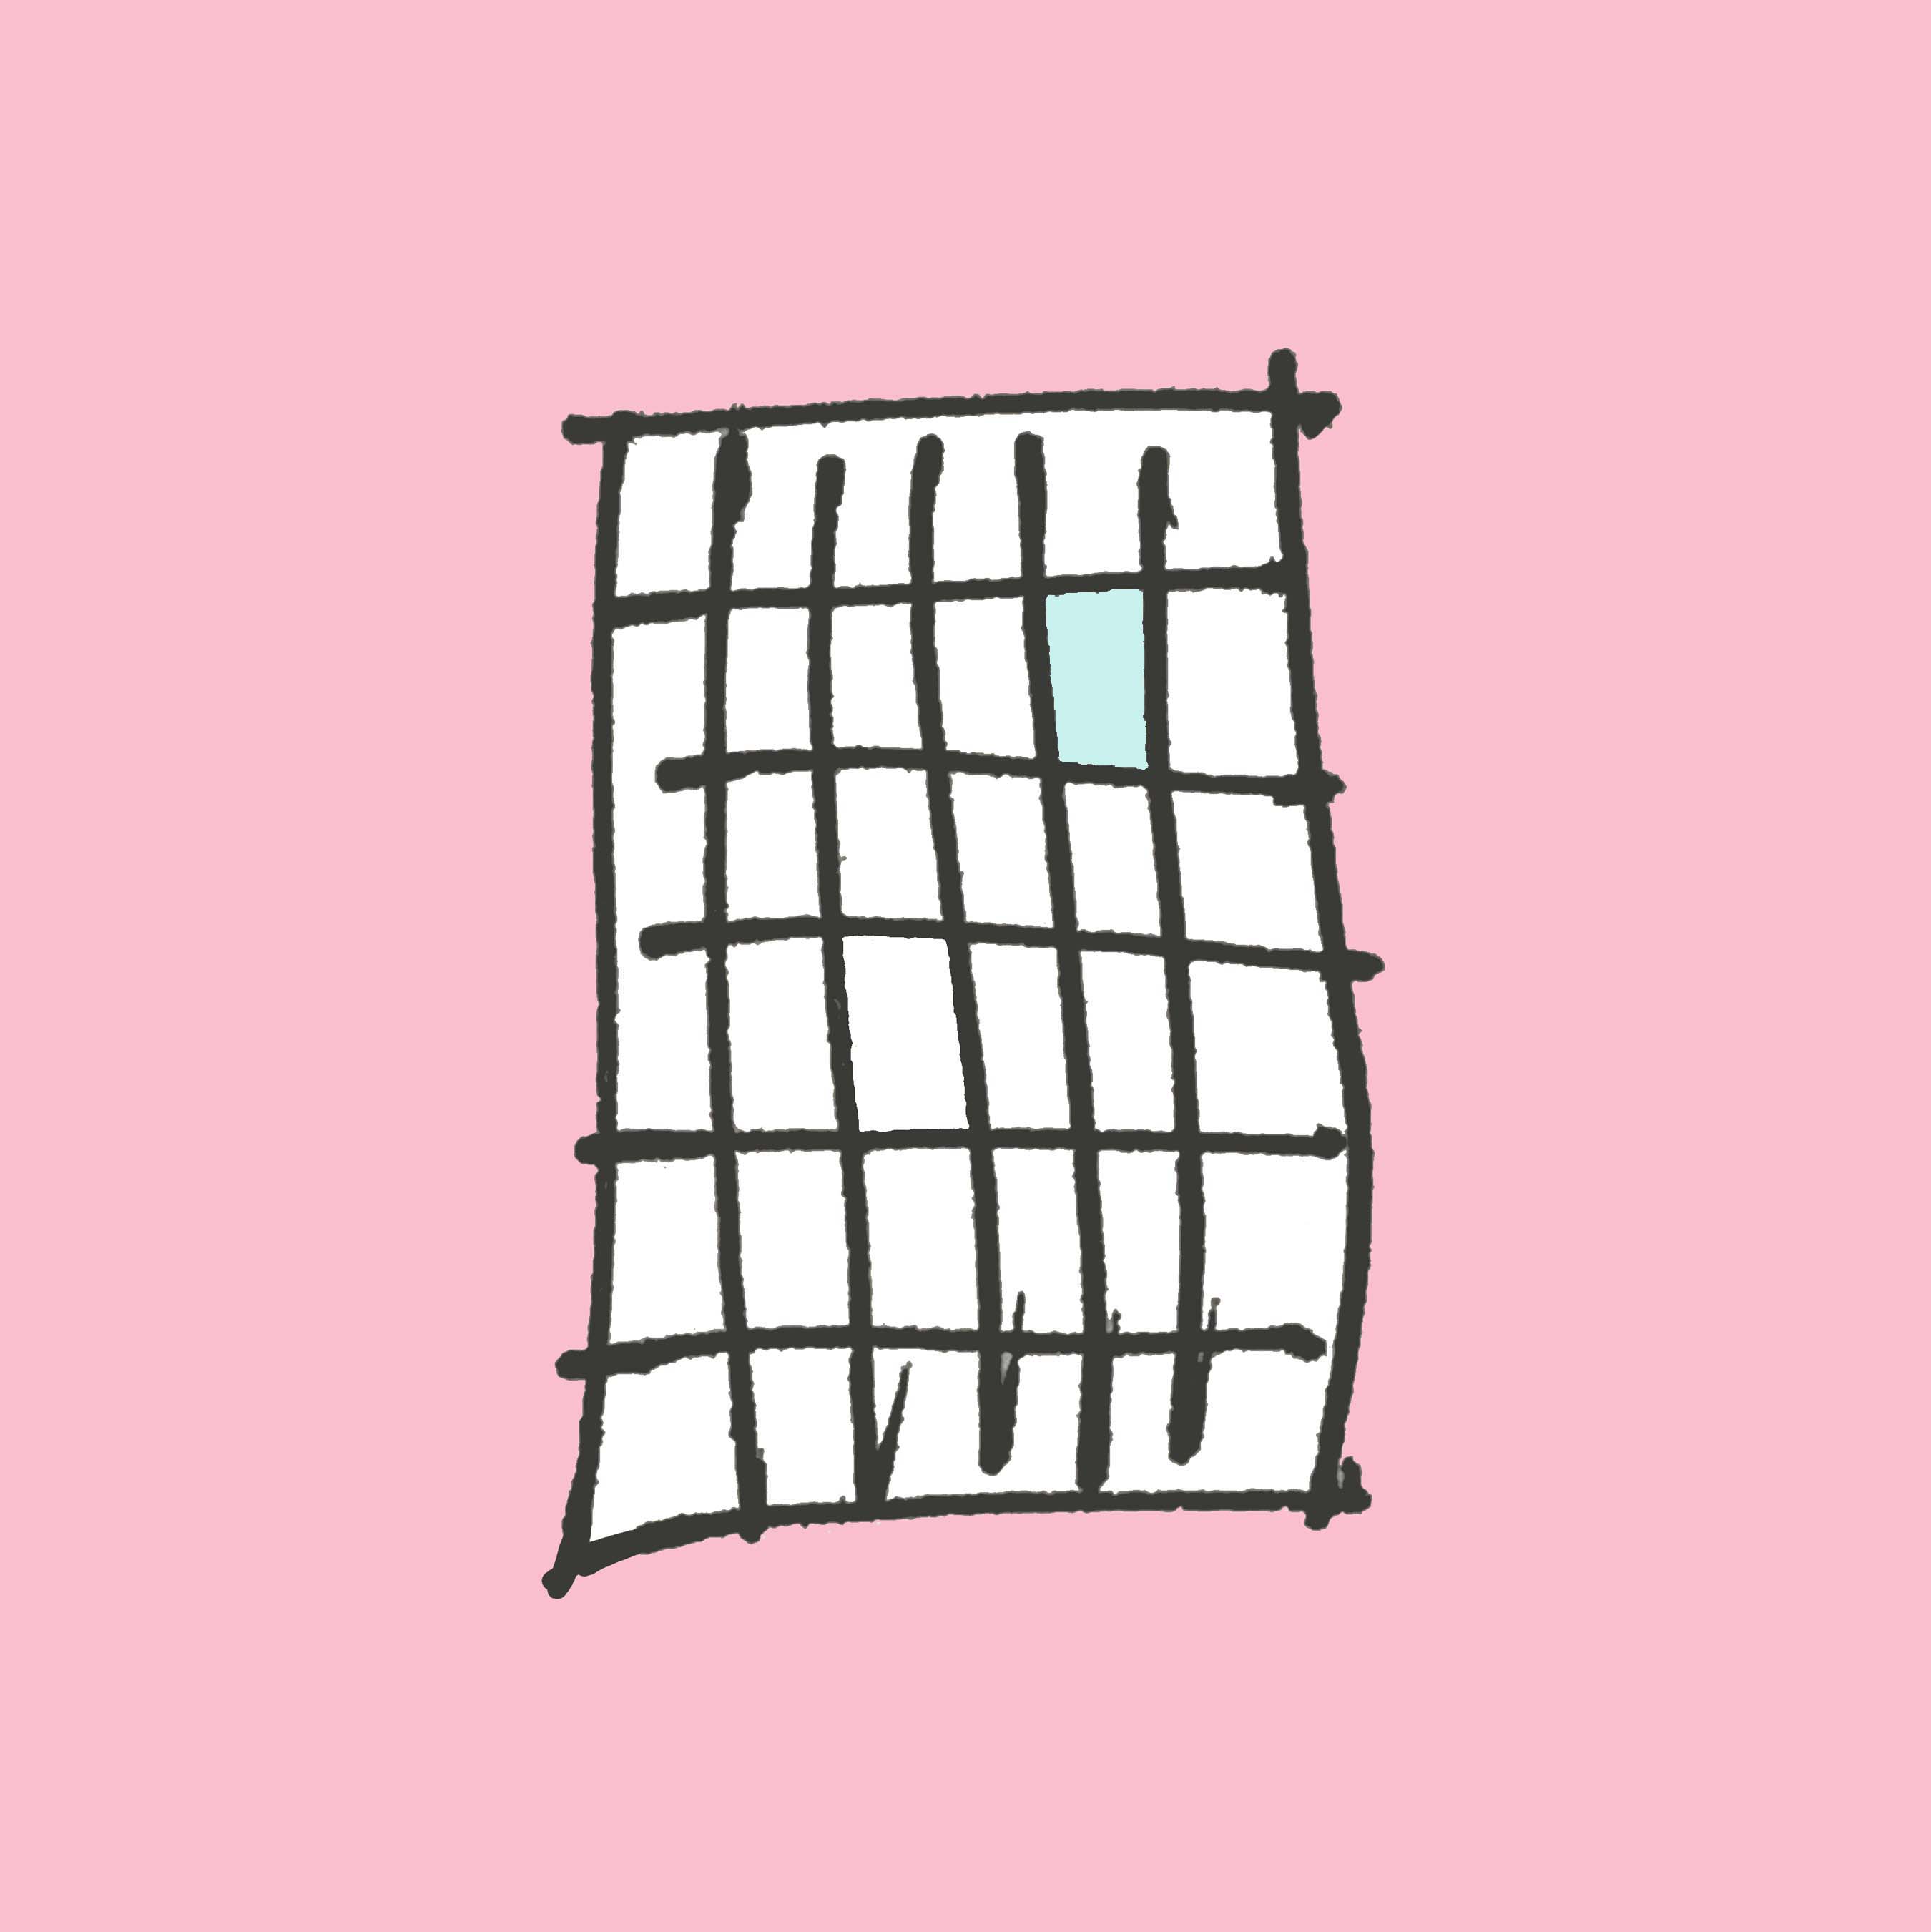 art every day number 456 coffee shop doodle number 2 grid rectangles pink blue